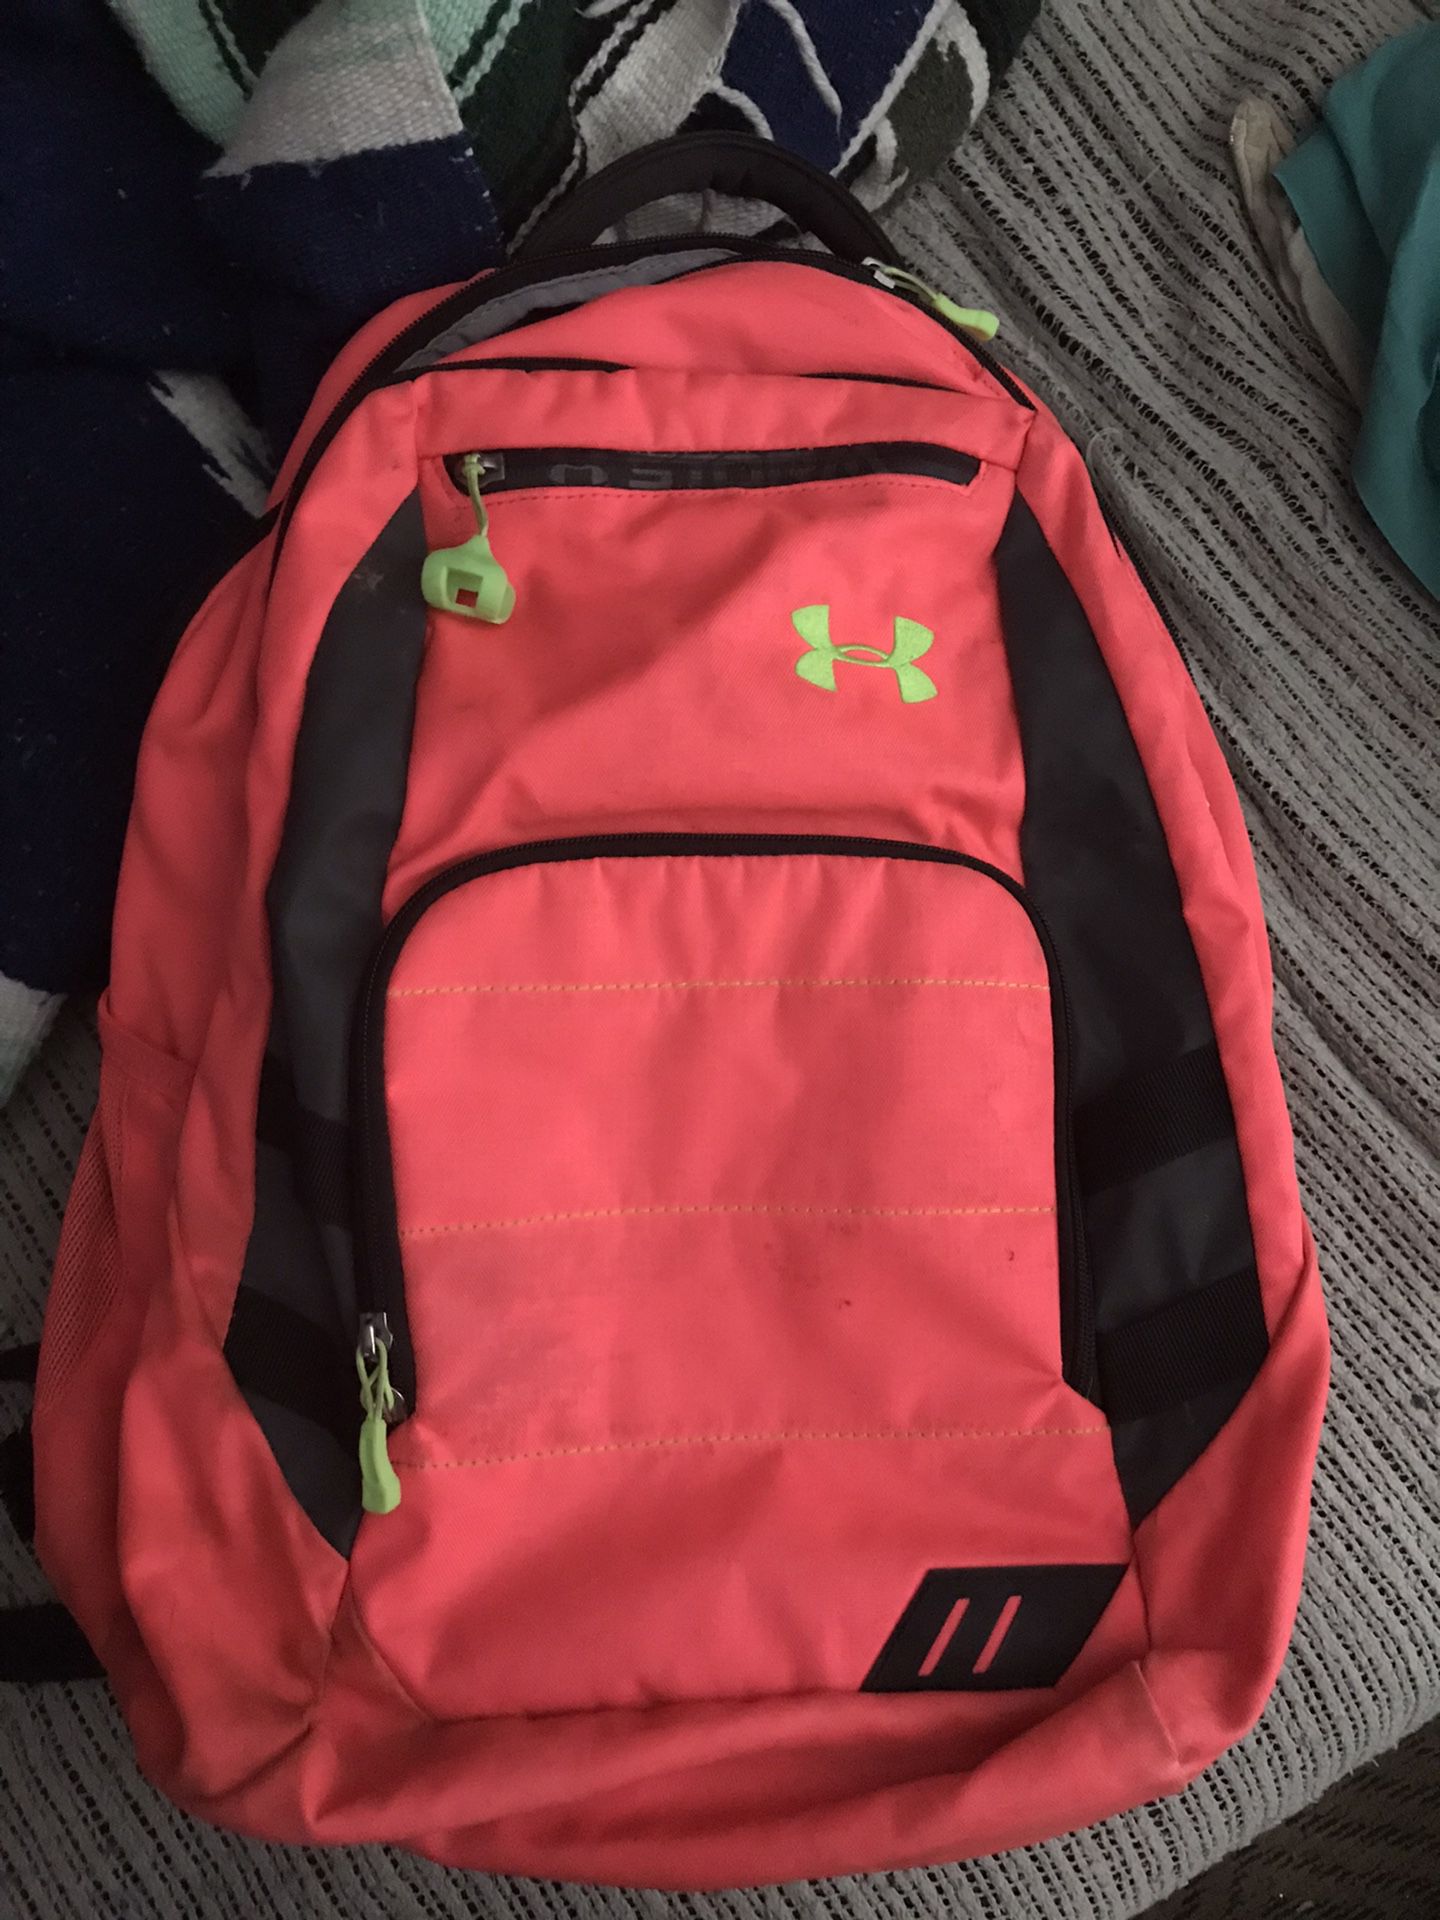 Lnew Large Heavy Duty Under Armor Backpack Only $40 Firm